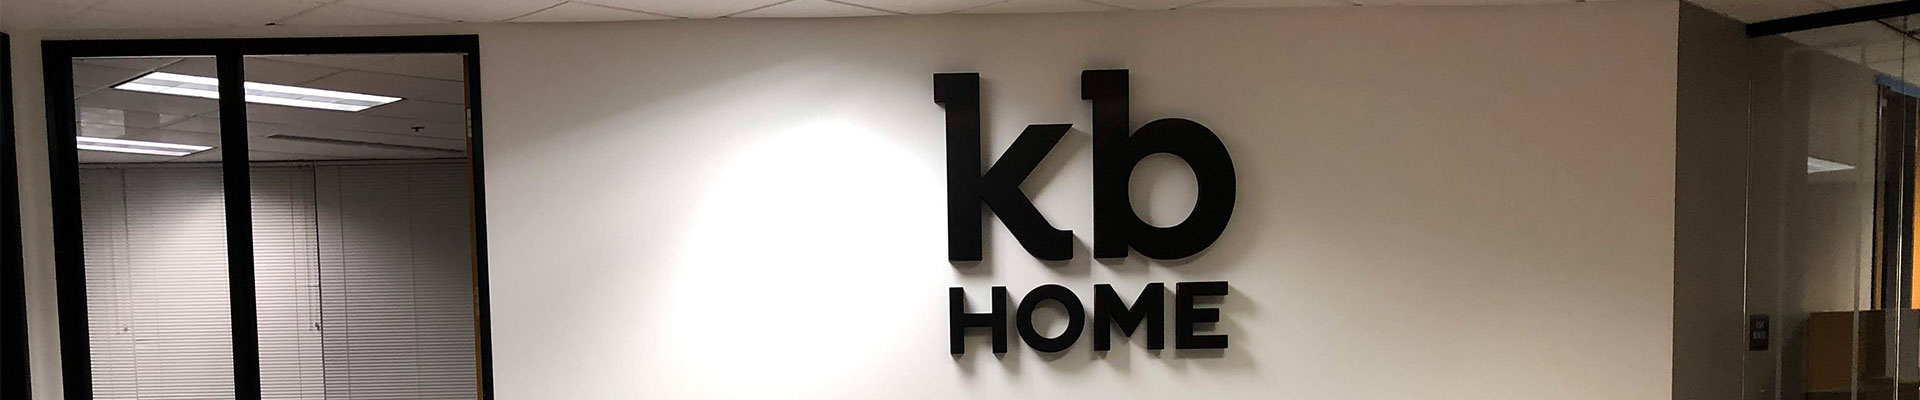 Kb Home office signs in Sacramento, CA